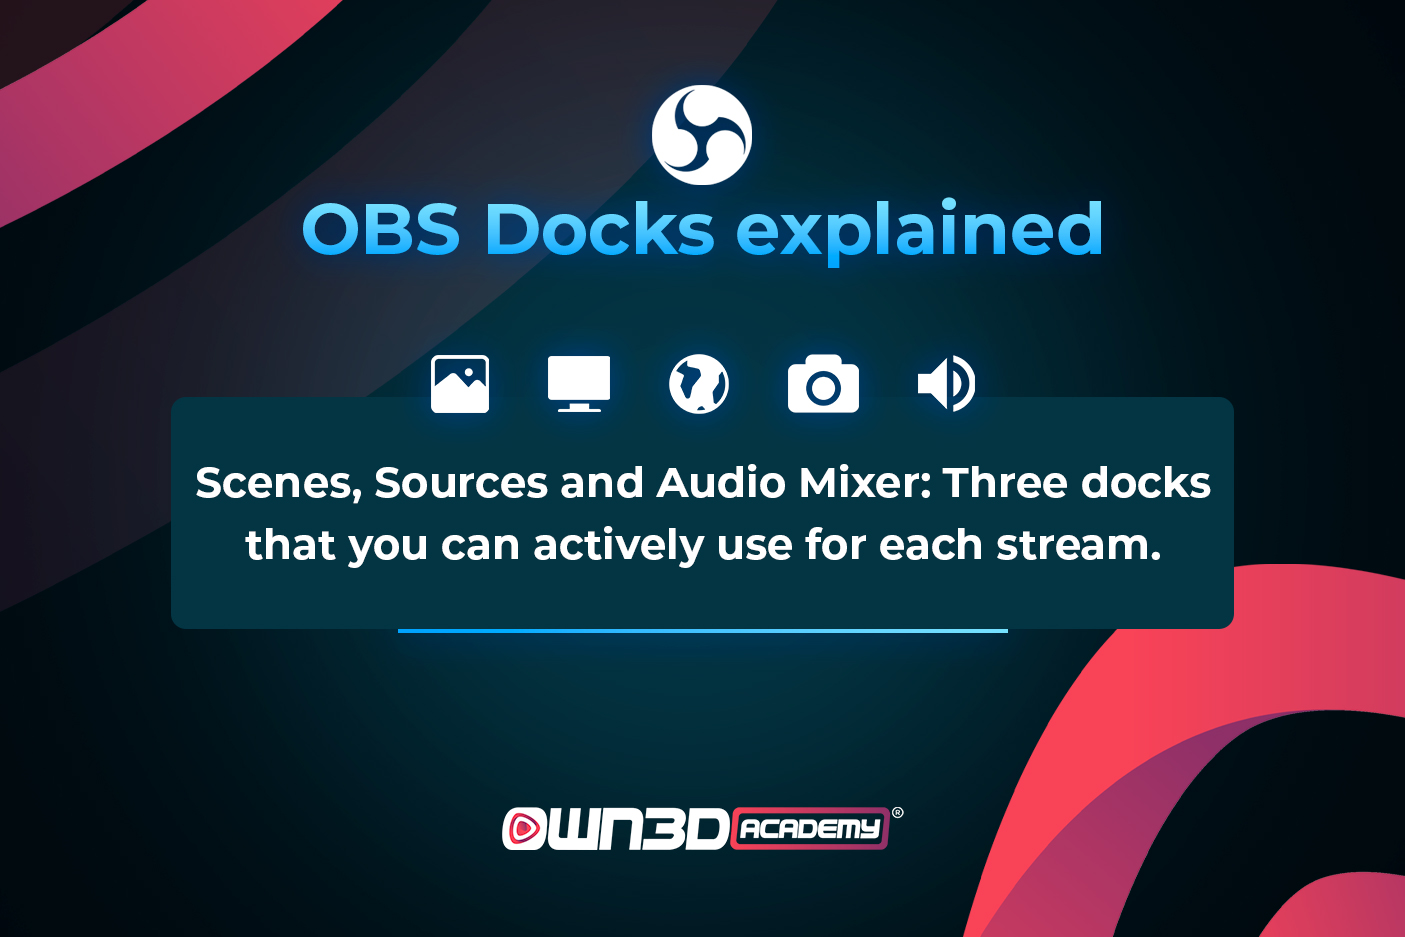 OBS-DOCKS-EXPLAINED_ENG_Scenes-Sources-and-Audio-Mixer-standard-docks.jpg